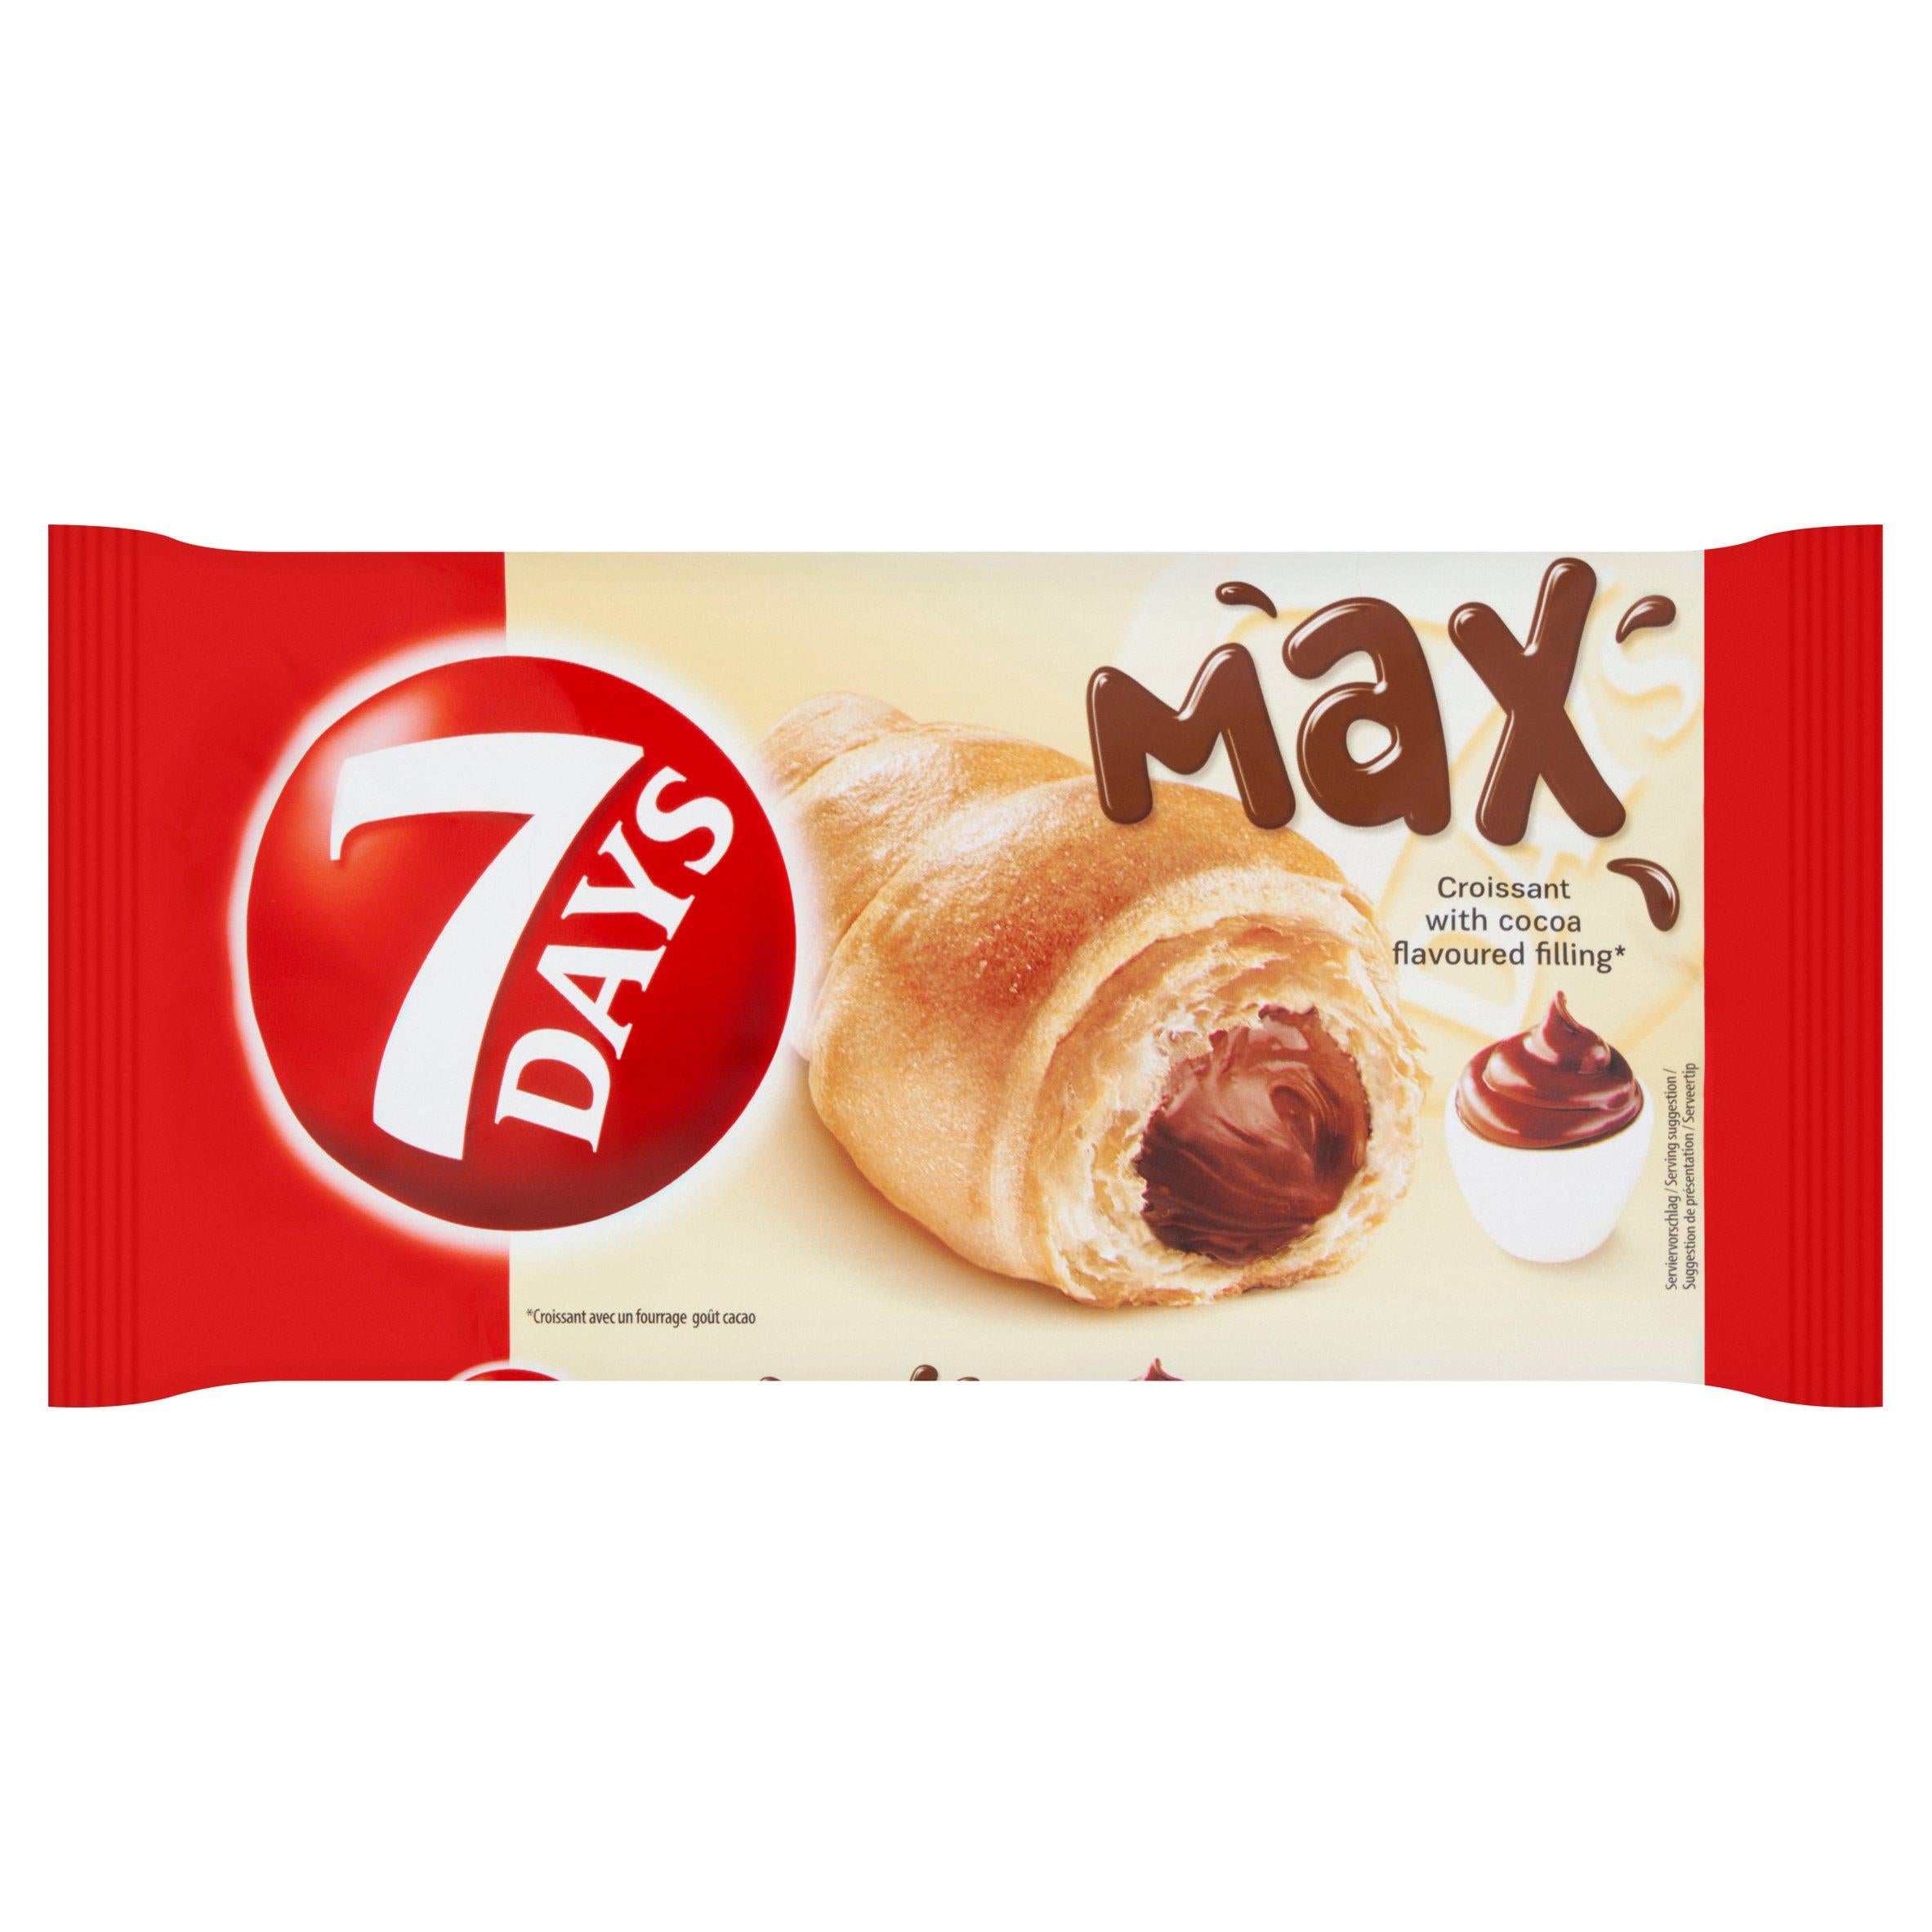 7 Days Croissant with Cocoa Filling Mах 80g Tastes of the World Sainsburys   